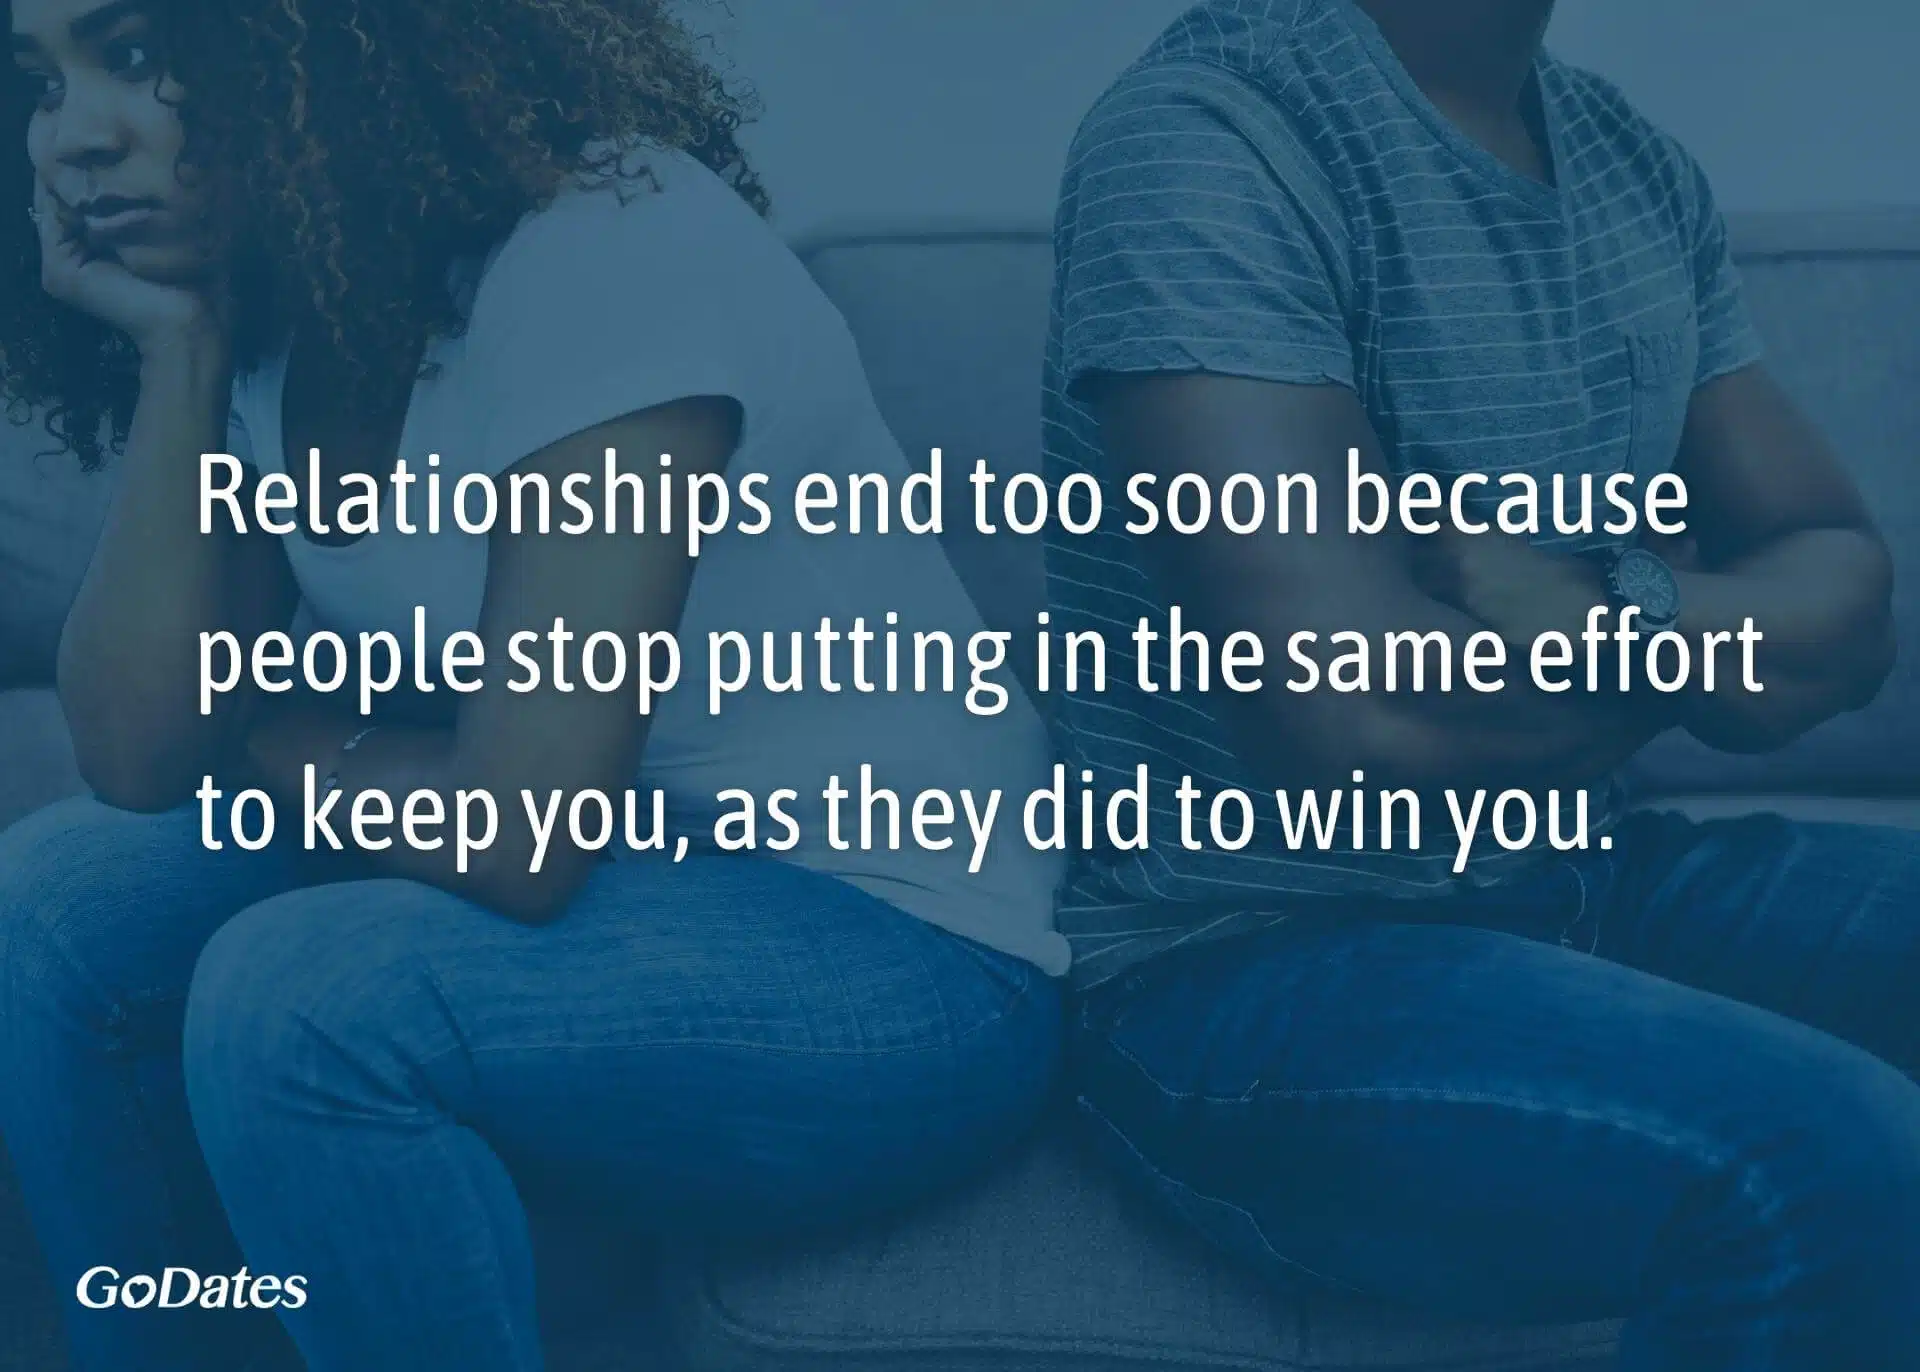 People stop putting the same effort to keep you as they did to win you quote